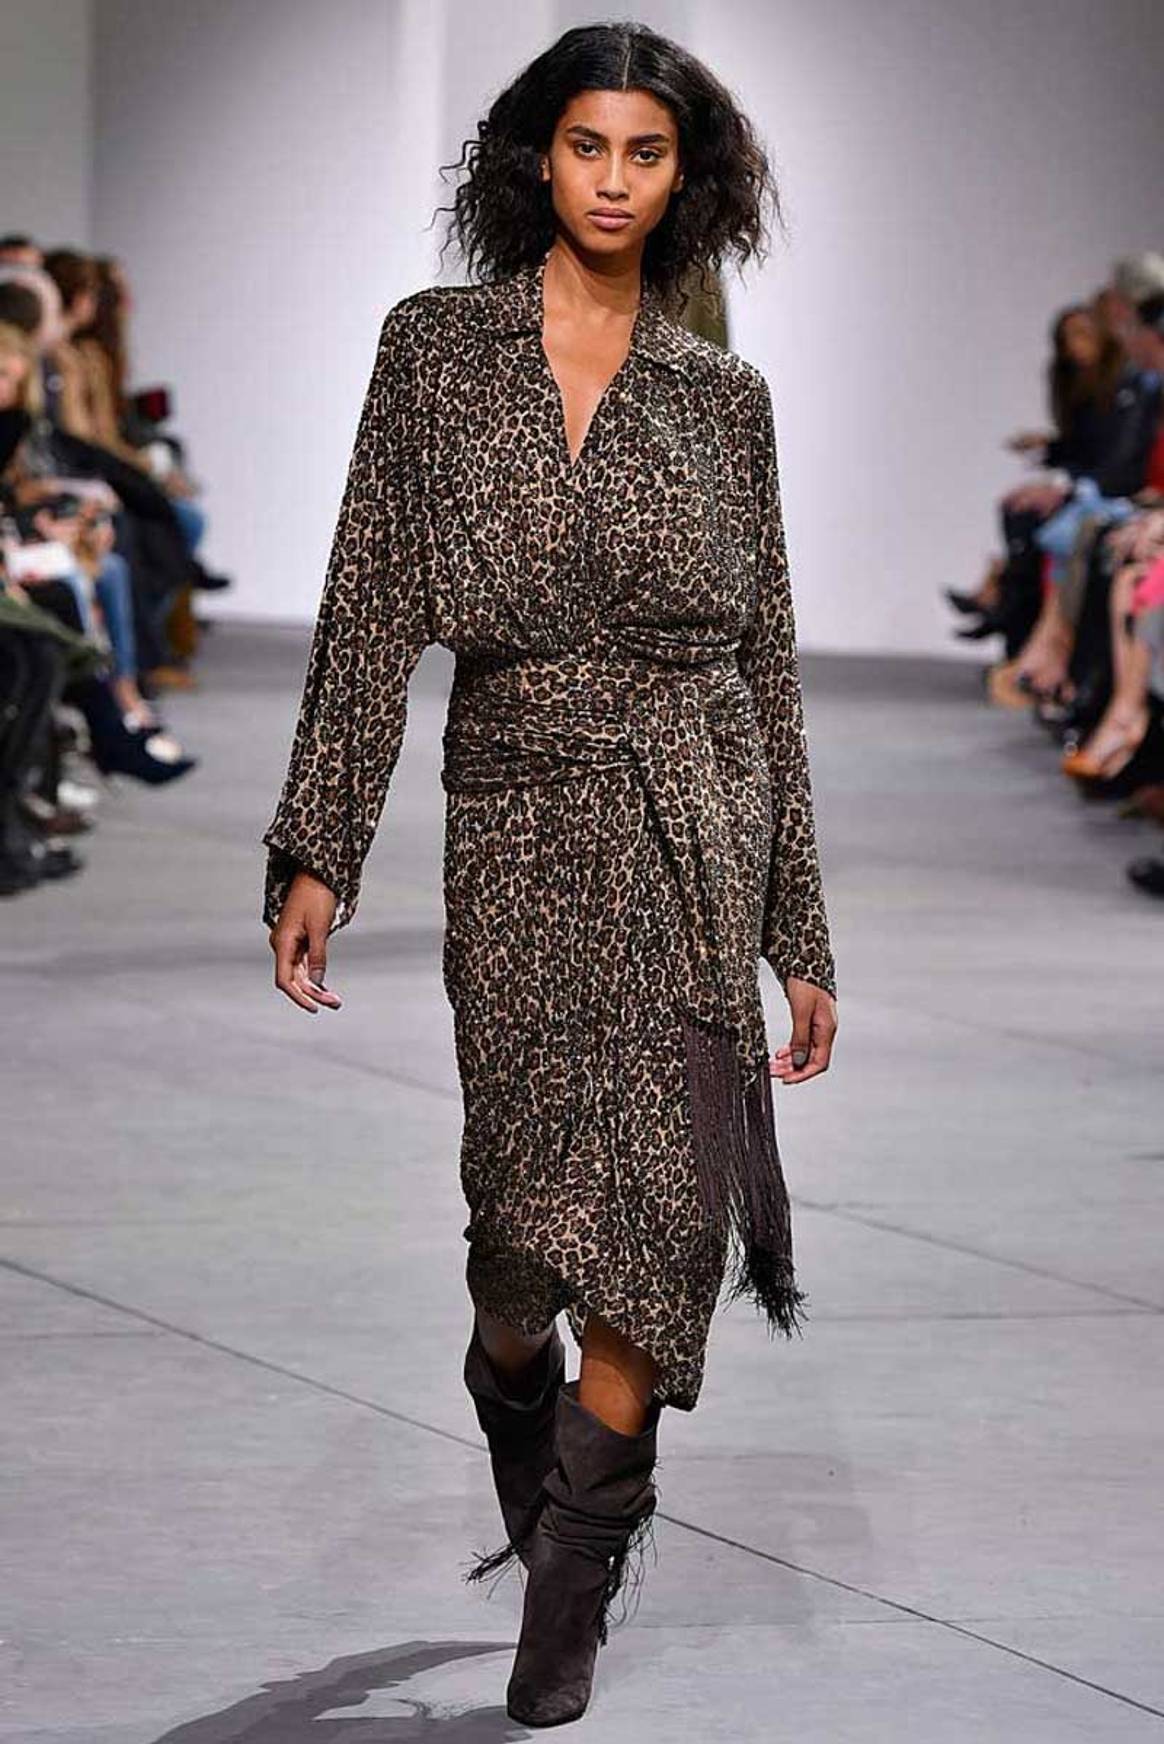 Ralph Lauren wows, Kanye grows up, Kors goes plus-size at NYFW